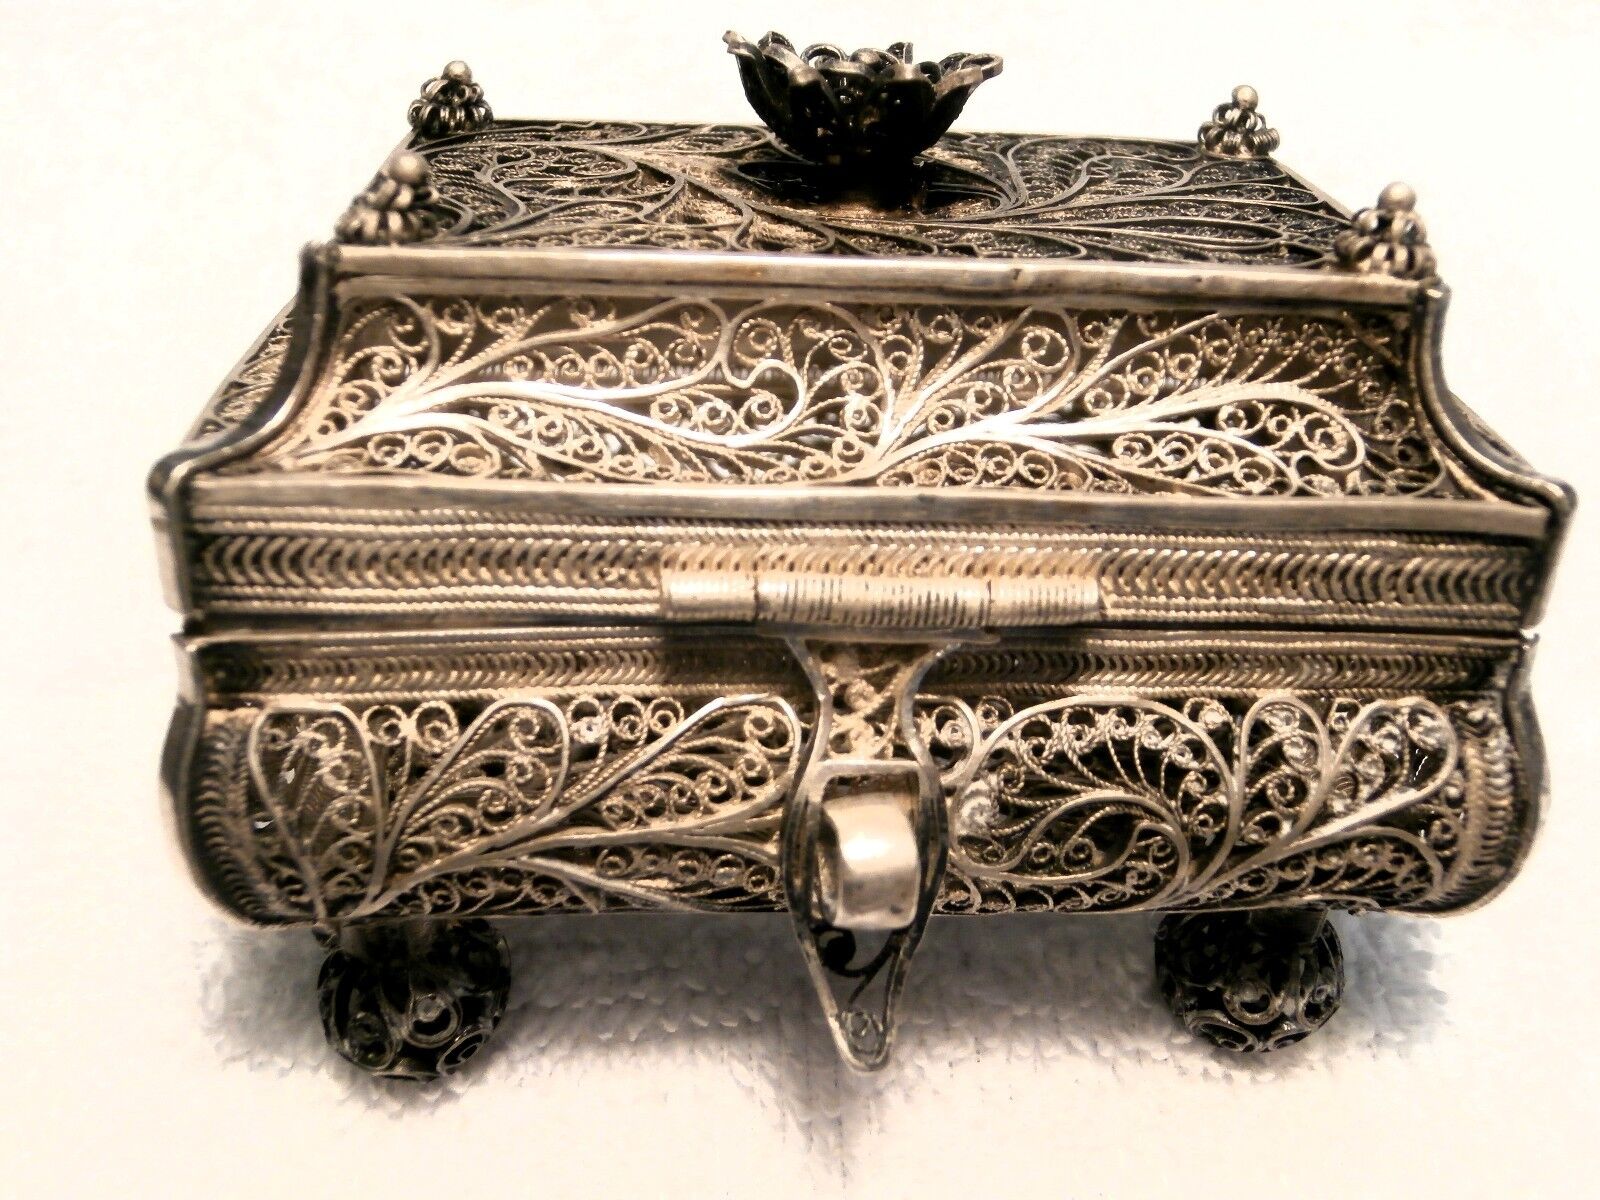 JUDAICA: 1857 MOSCOW RARE BESOMIN SPICE CONTAINER IN .9475  SILVER FILIGREE